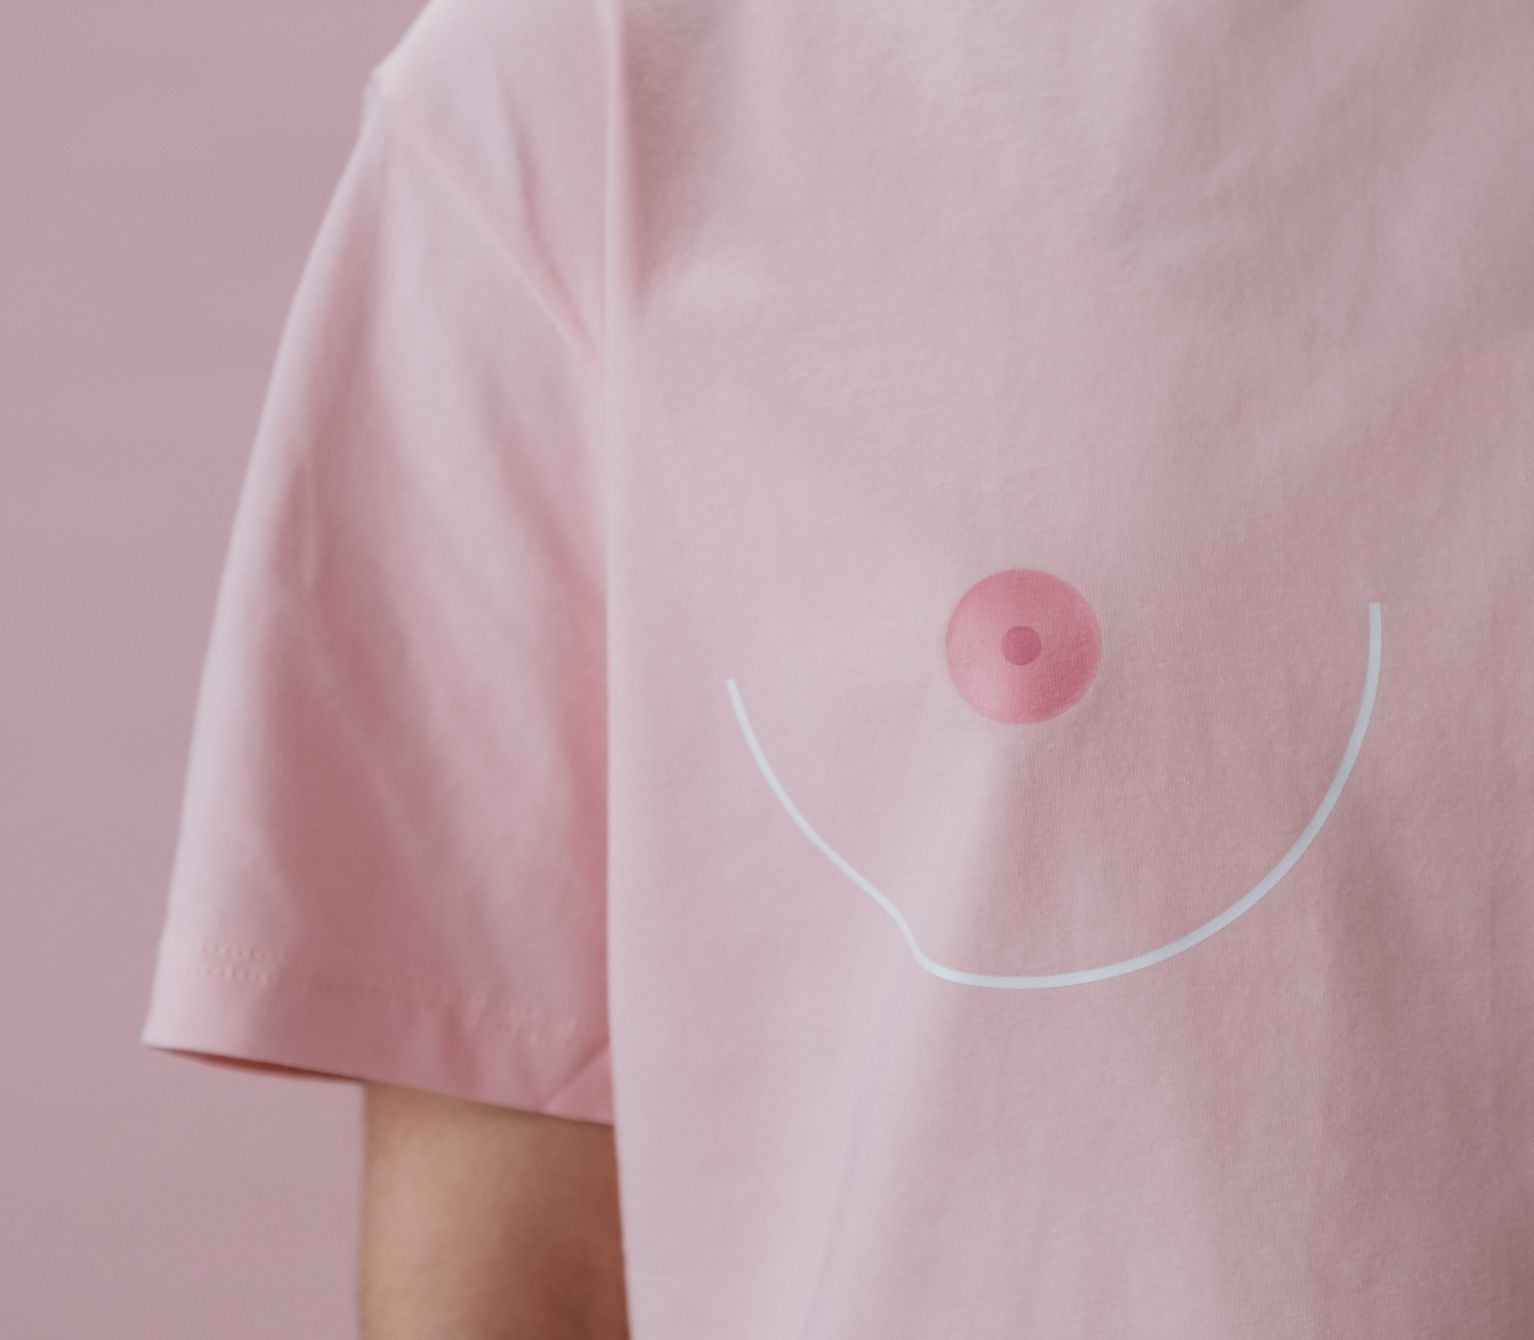 Woman wearing a pink t-shirt with a drawing of a nipple and breast to highlight the importance of getting a mammogram.